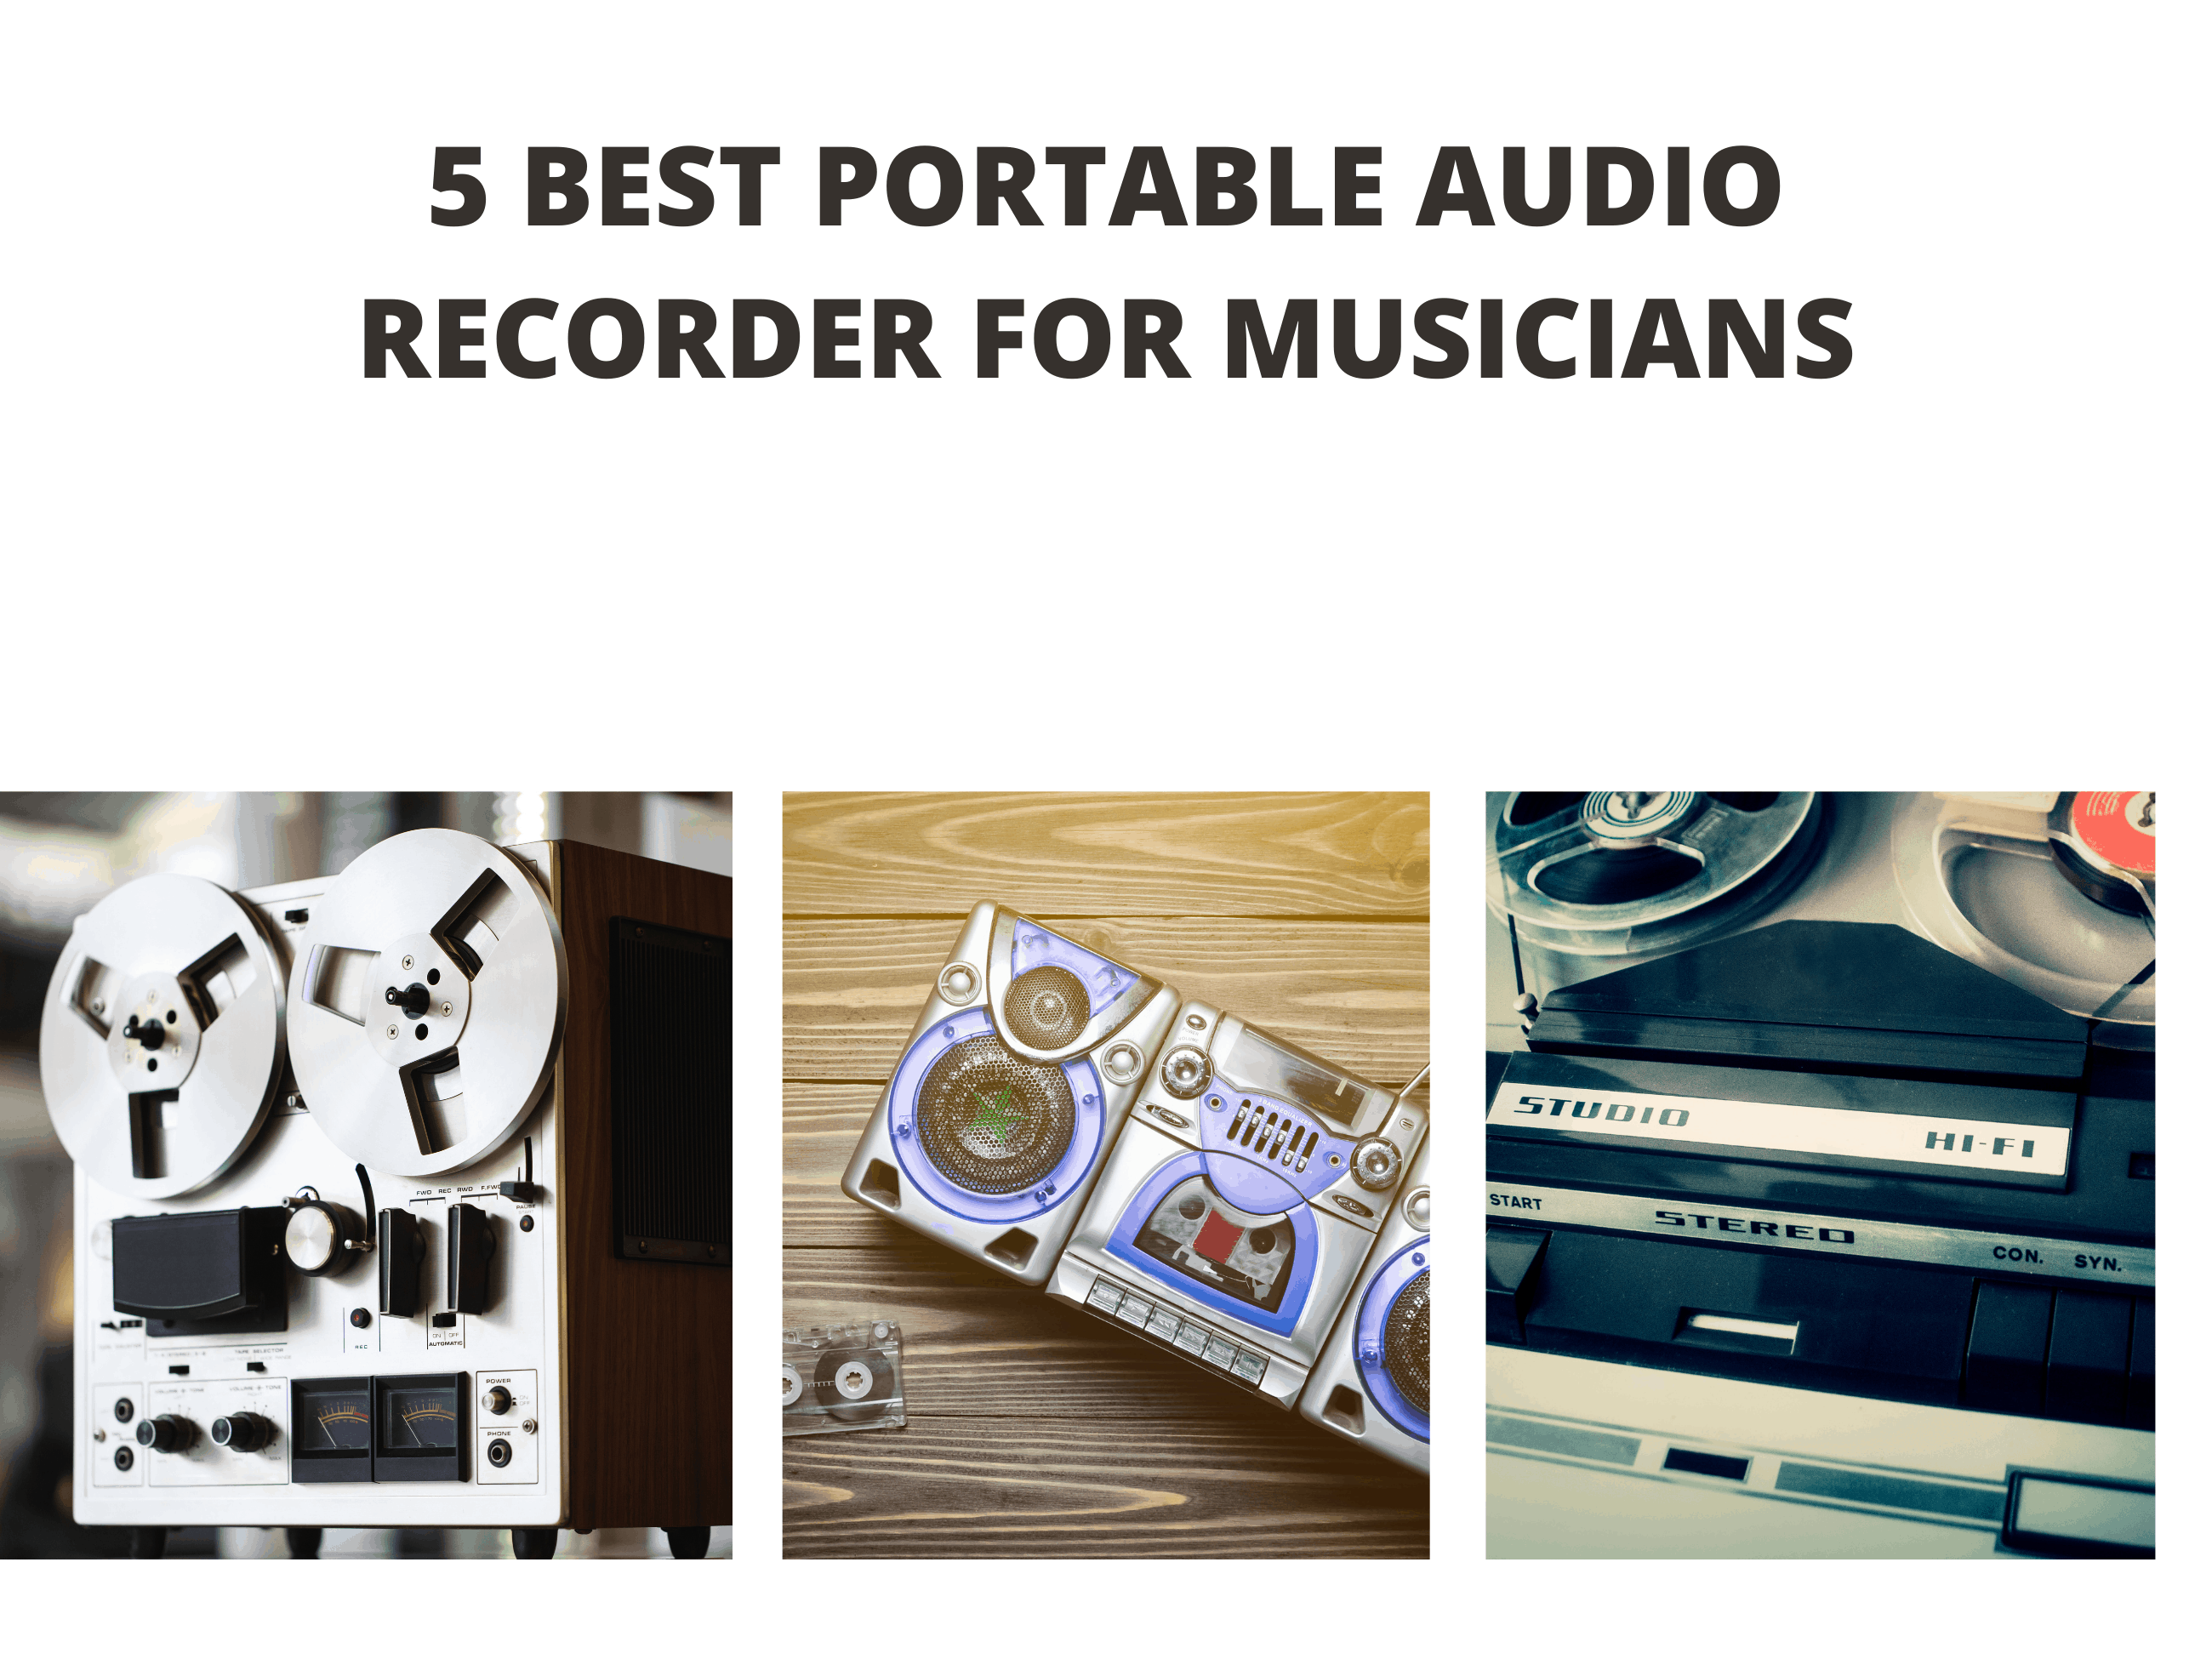 5 Best Portable Audio Recorder for Musicians (2021 Reviews)